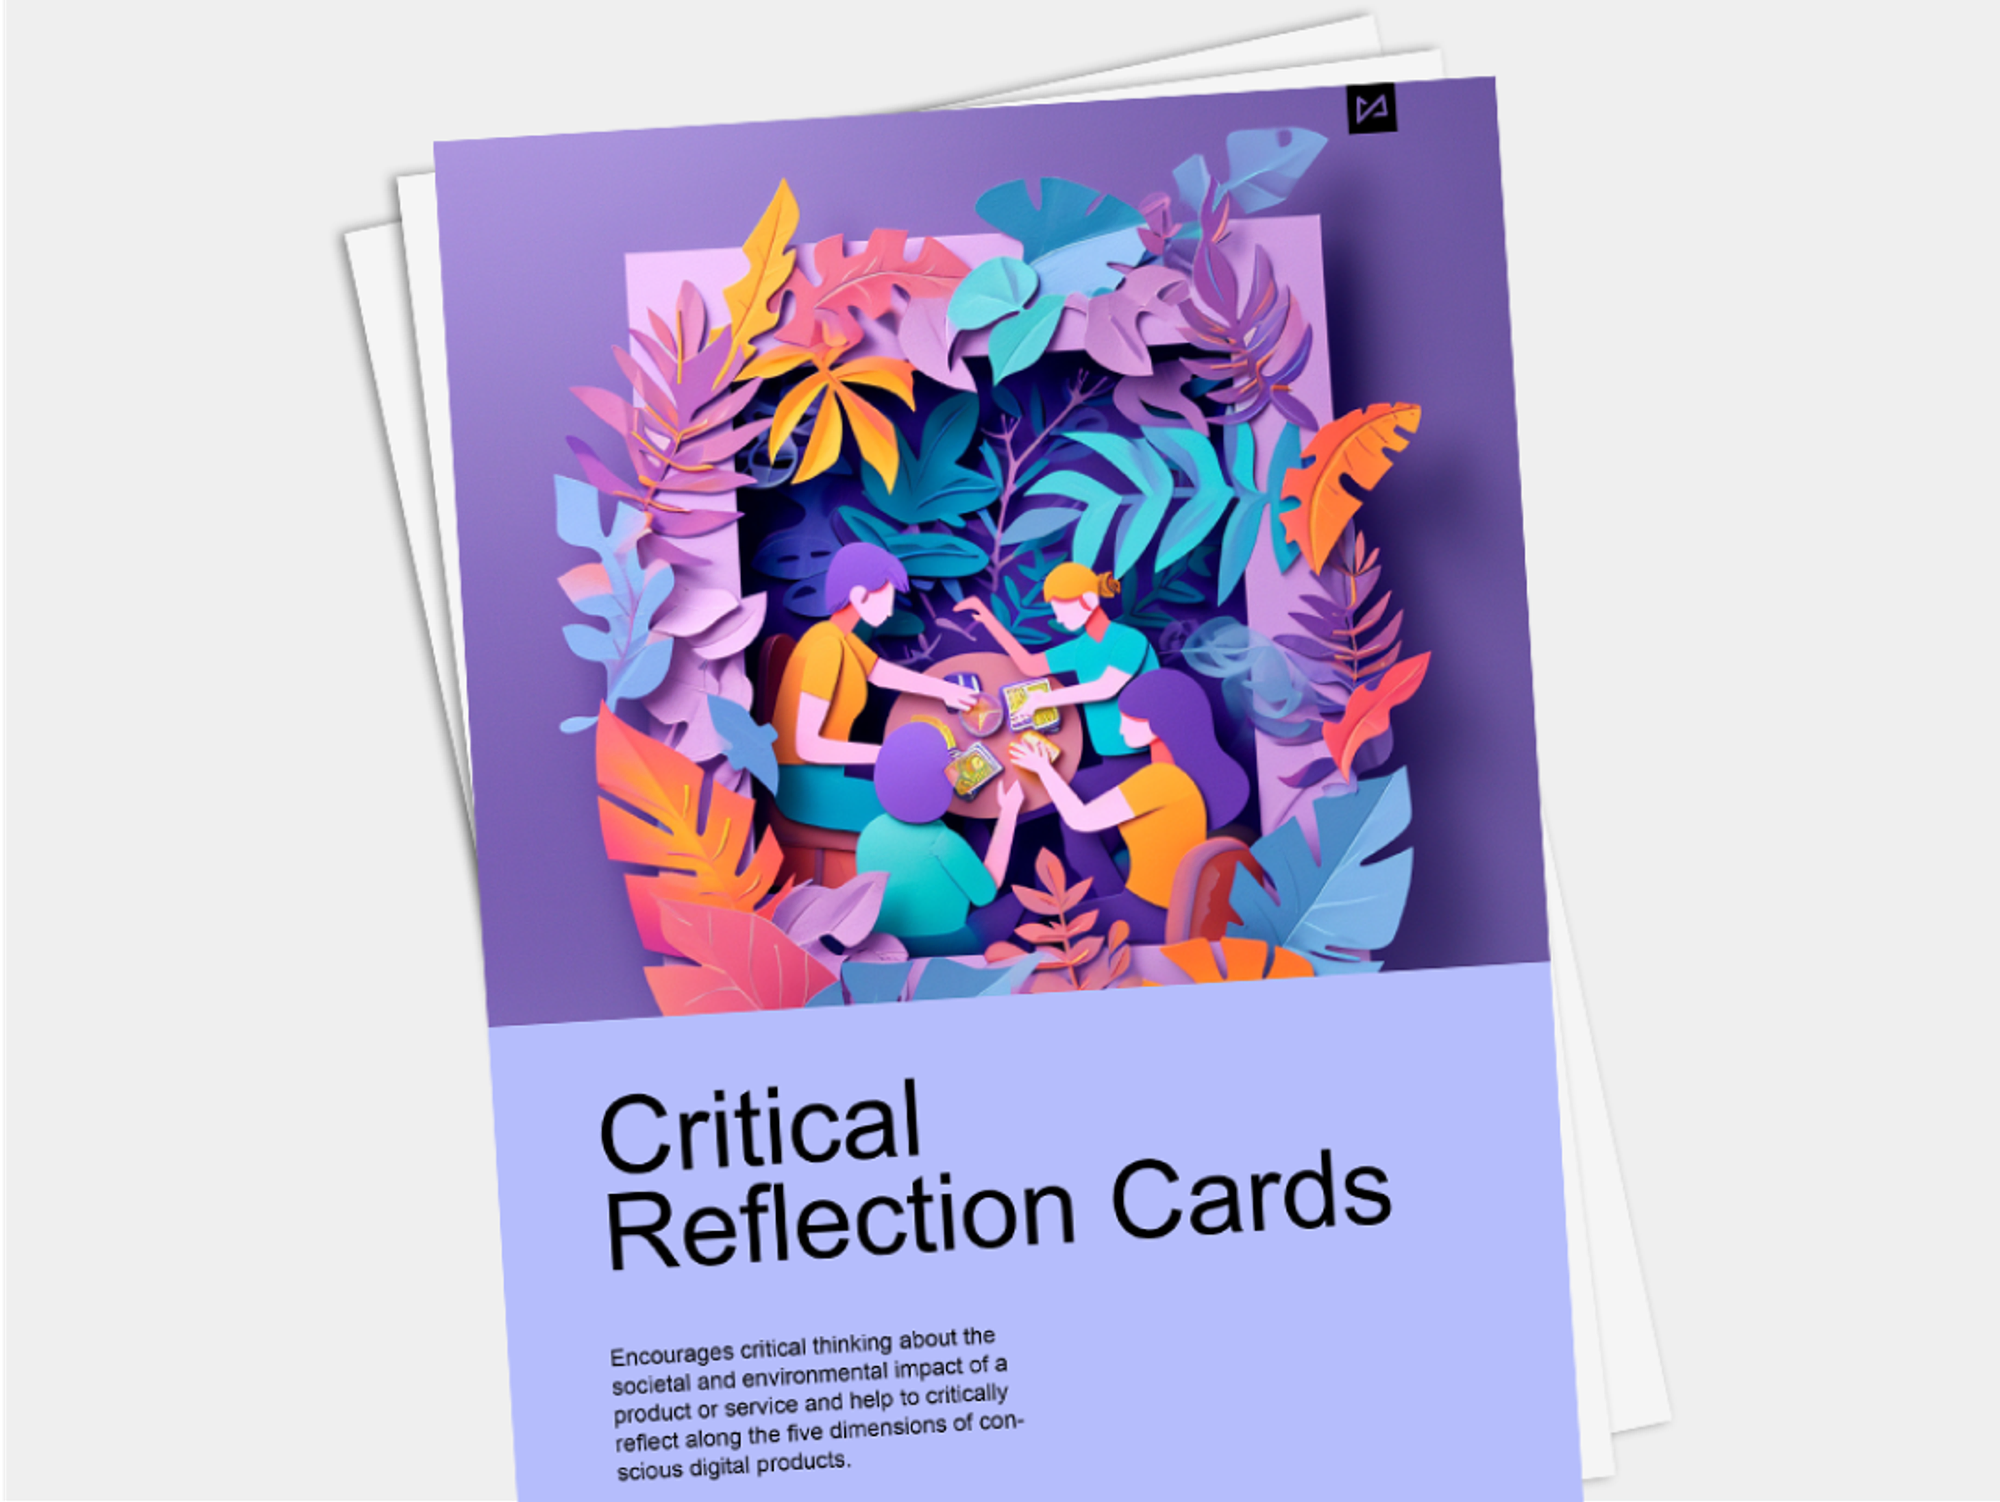 Booklet with "Critical Reflection Cards" on its cover